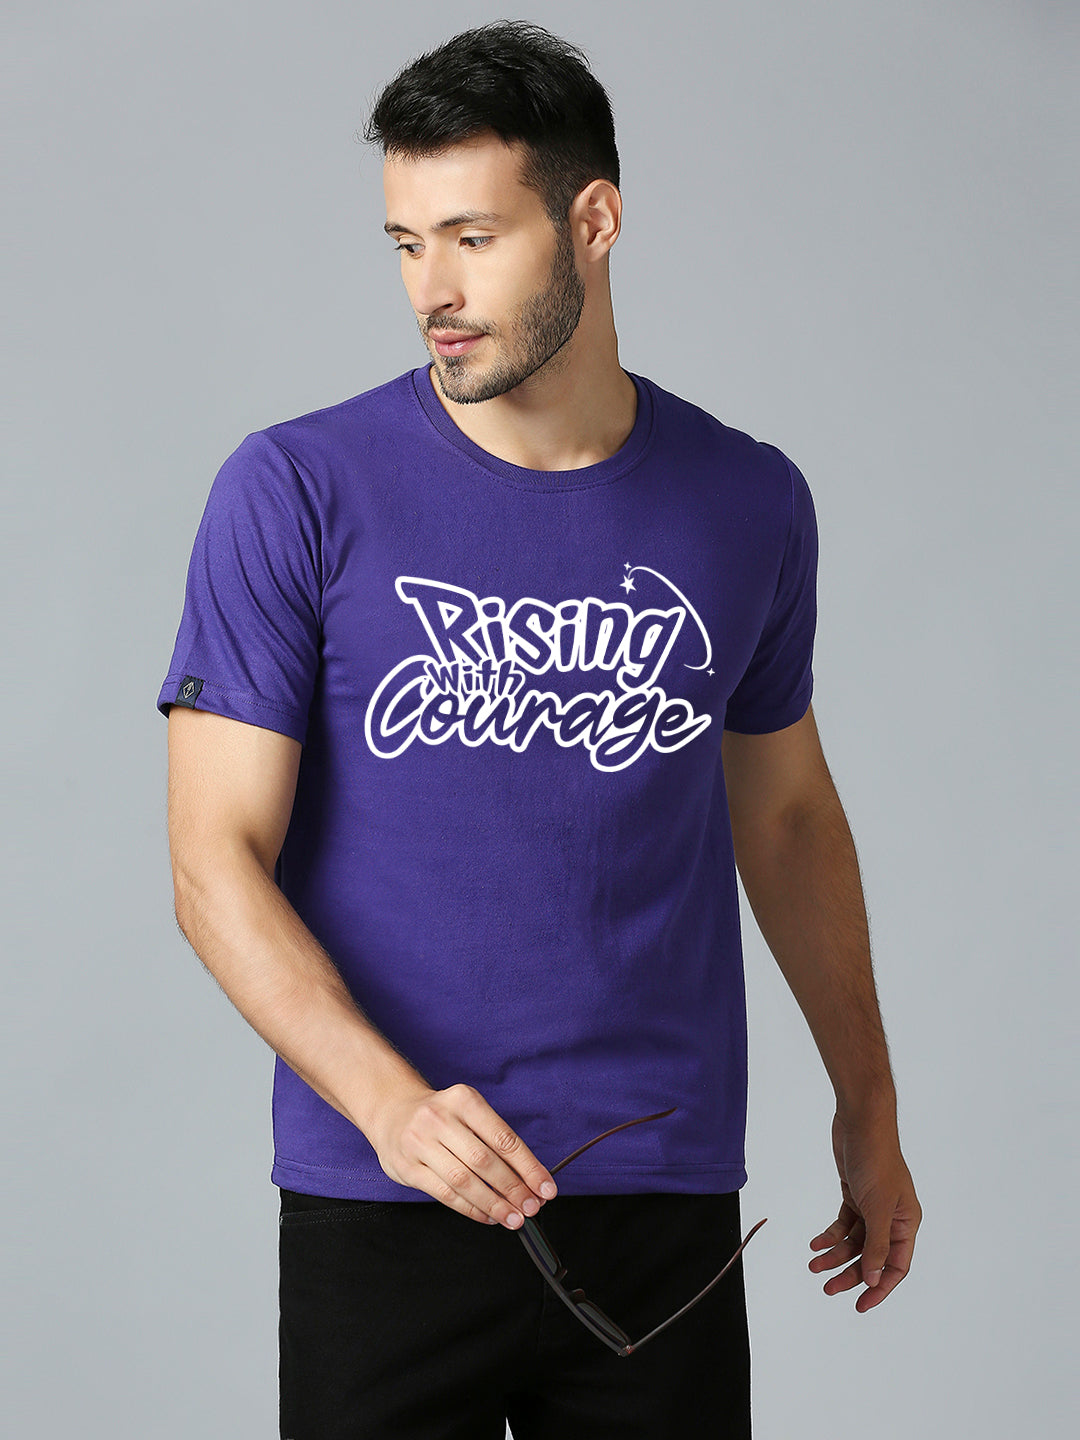 Rising With Courage T-Shirt